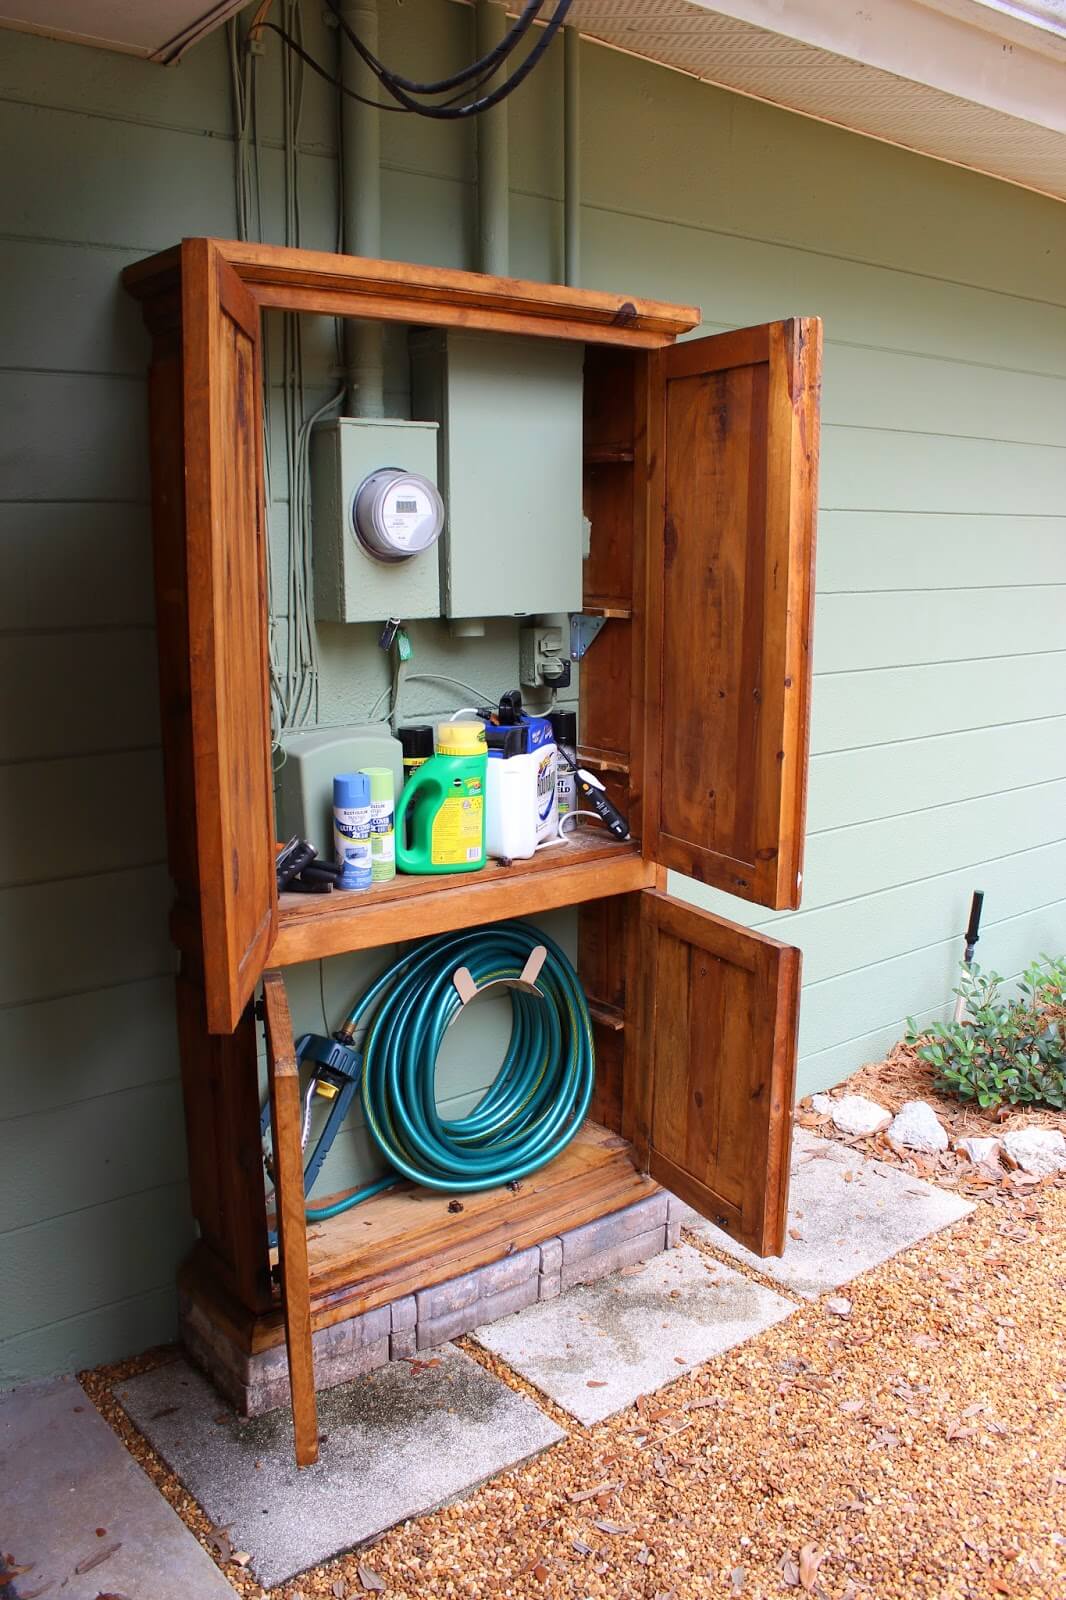 Lovely Cabinet Hides Utility Box and Garden Tools